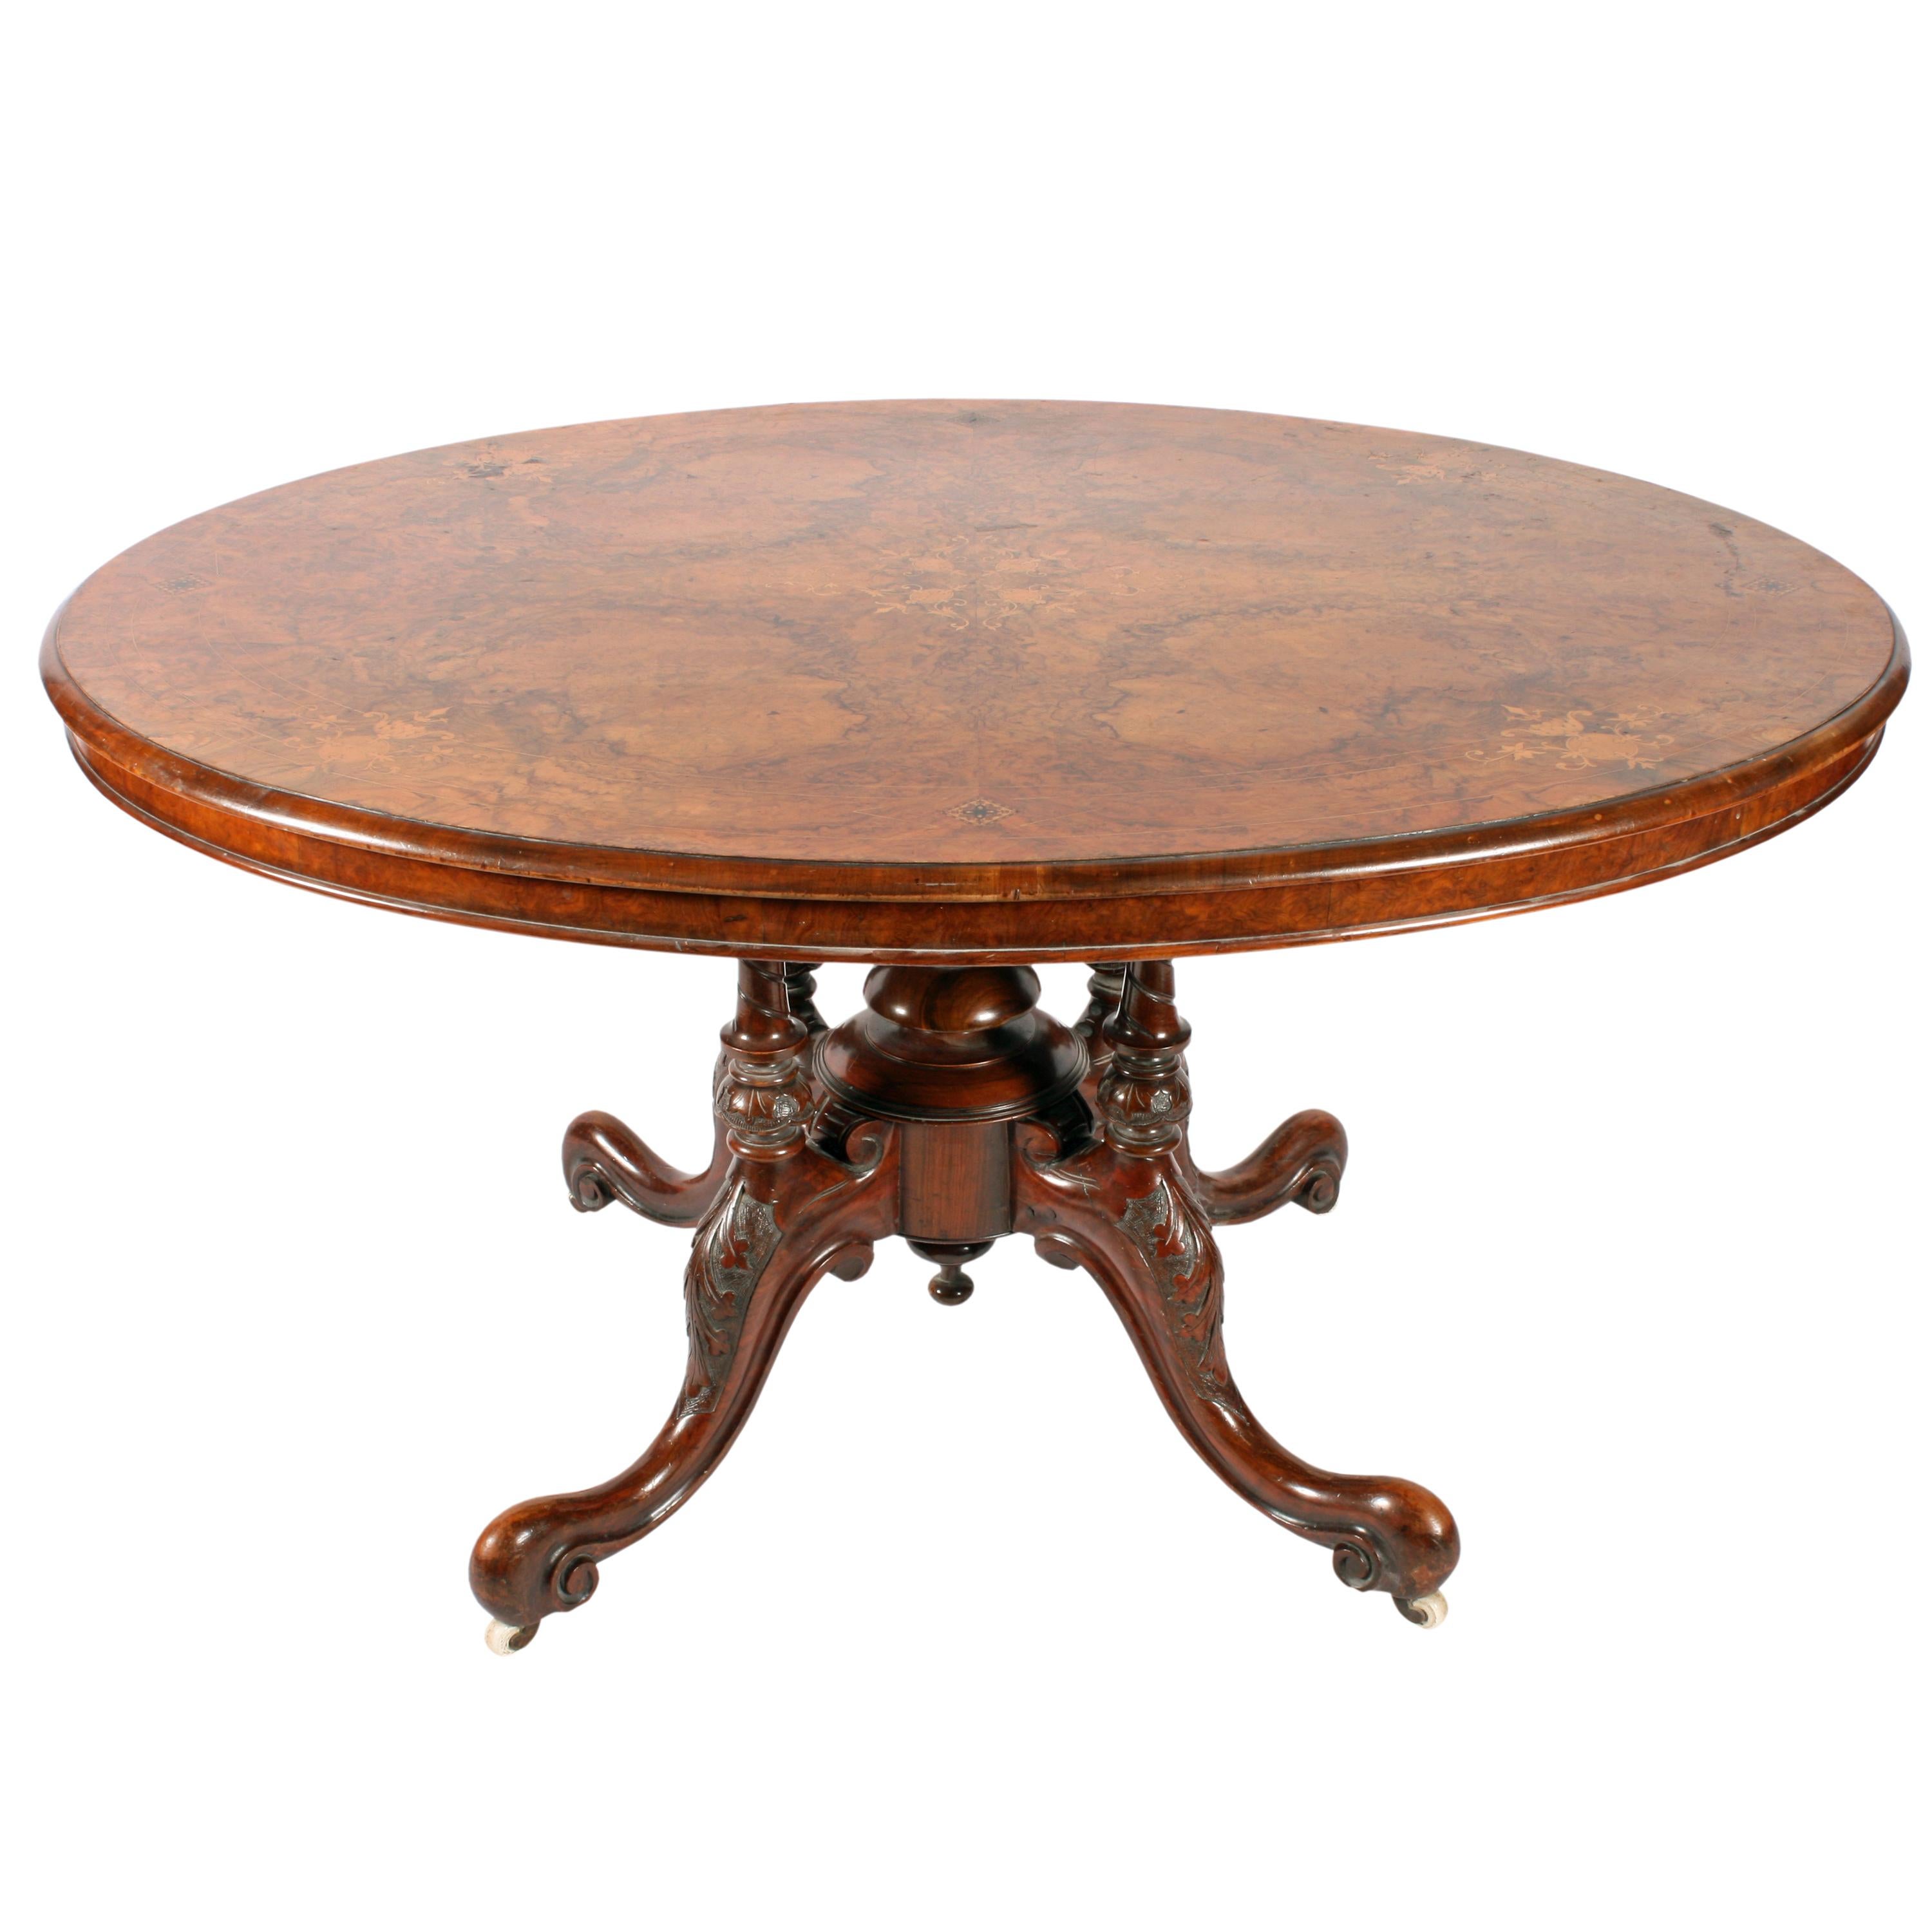 A 19th century Victorian burr walnut quarter veneered oval breakfast or loo table.

The table stands on a quadruped base, the top is box wood inlaid with panels of marquetry and Tunbridge inlay.

The base has four carved walnut cabriole legs